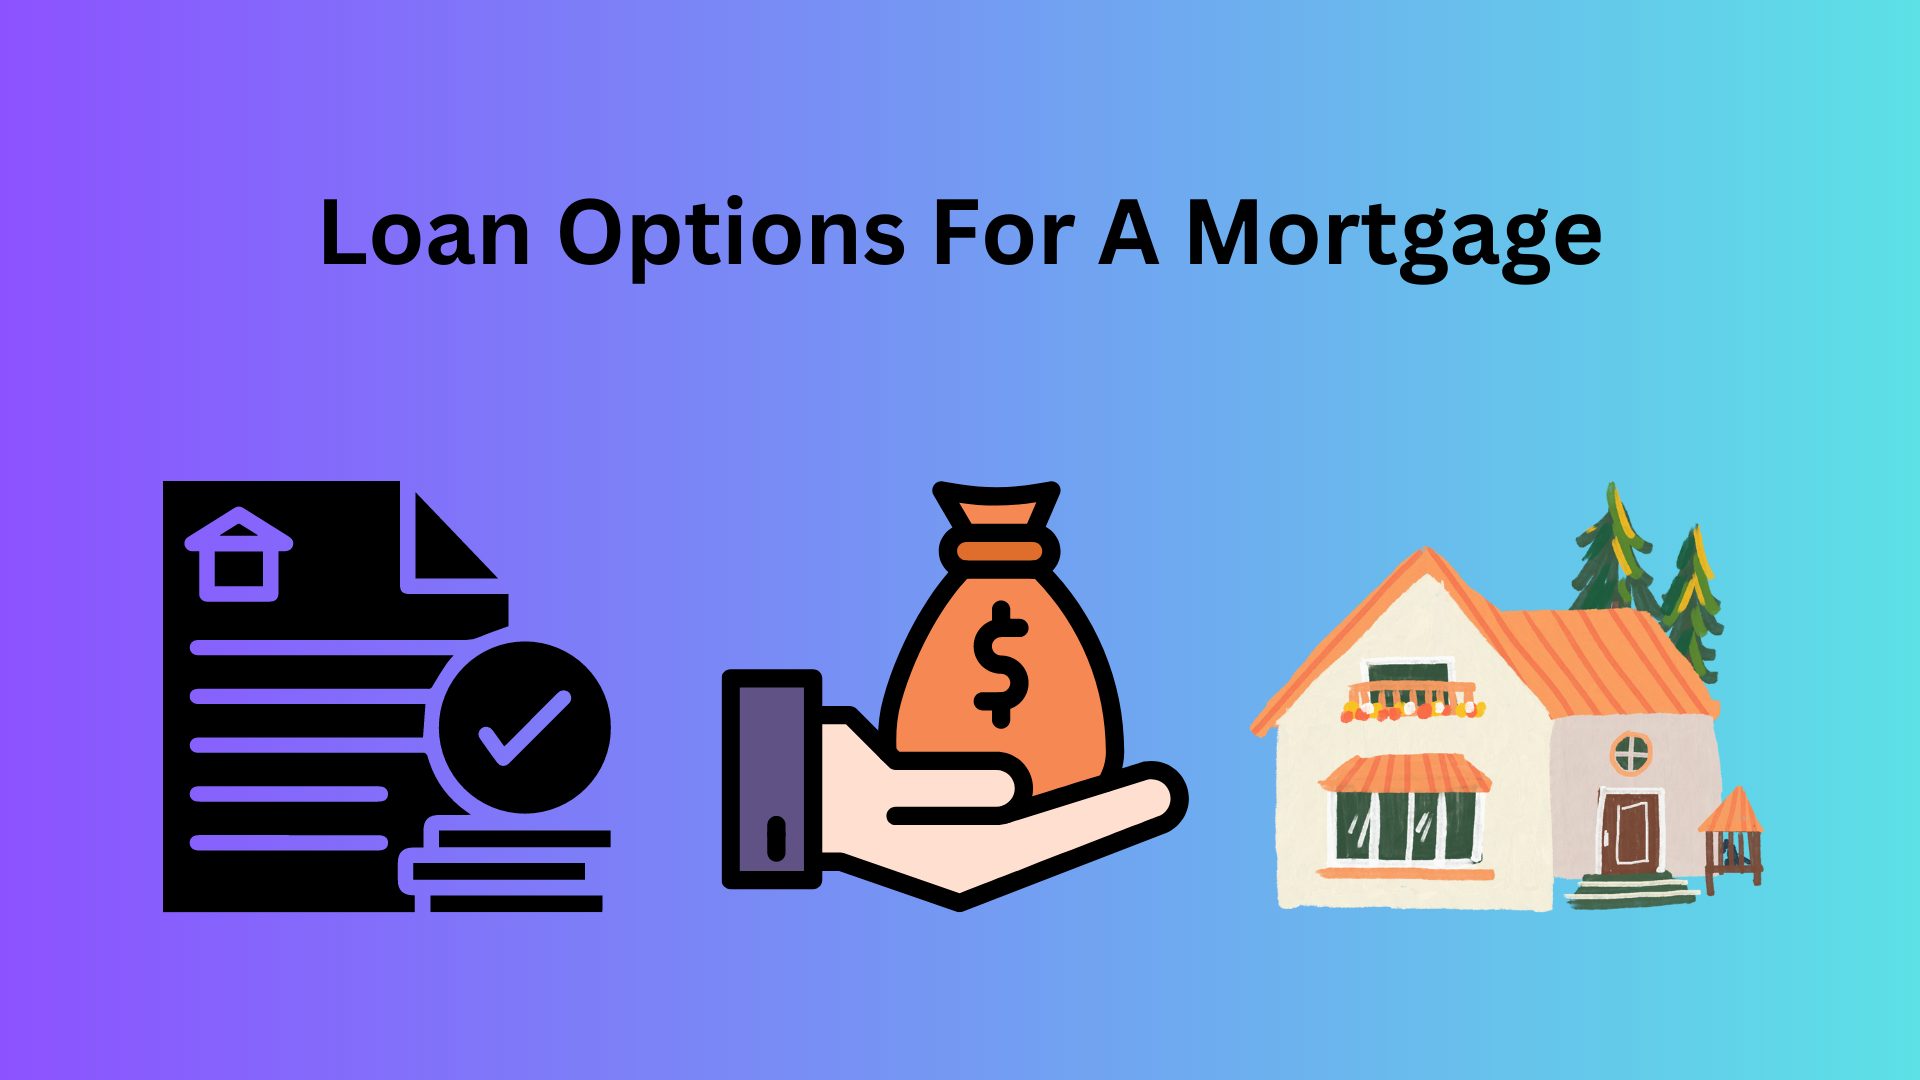 Review loan options for a home mortgage